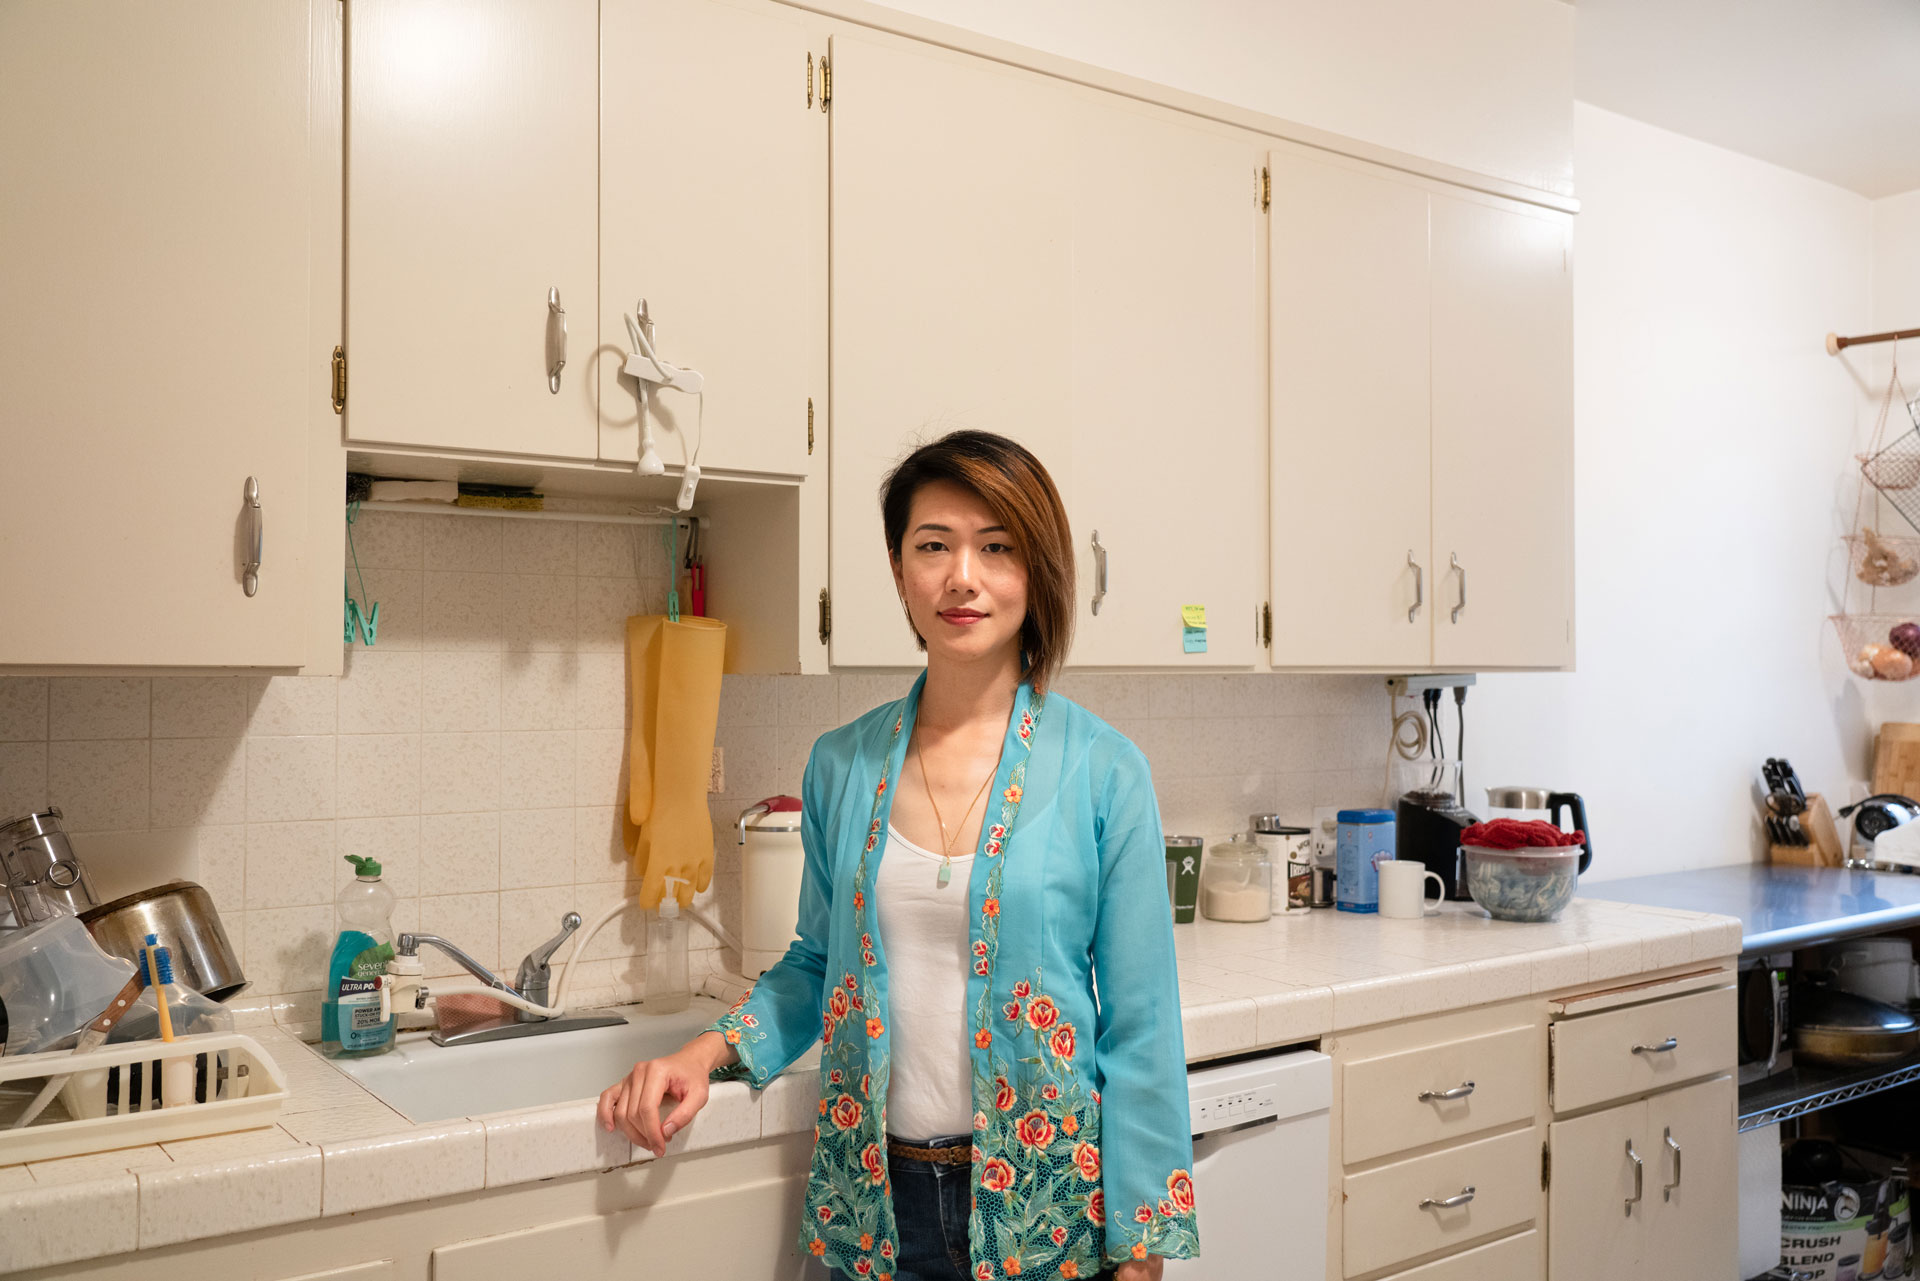 Woman in turquoise shirt leans one arm on the edge of sink, stands in her kitchen in front of cabinets and a long tiled counter.